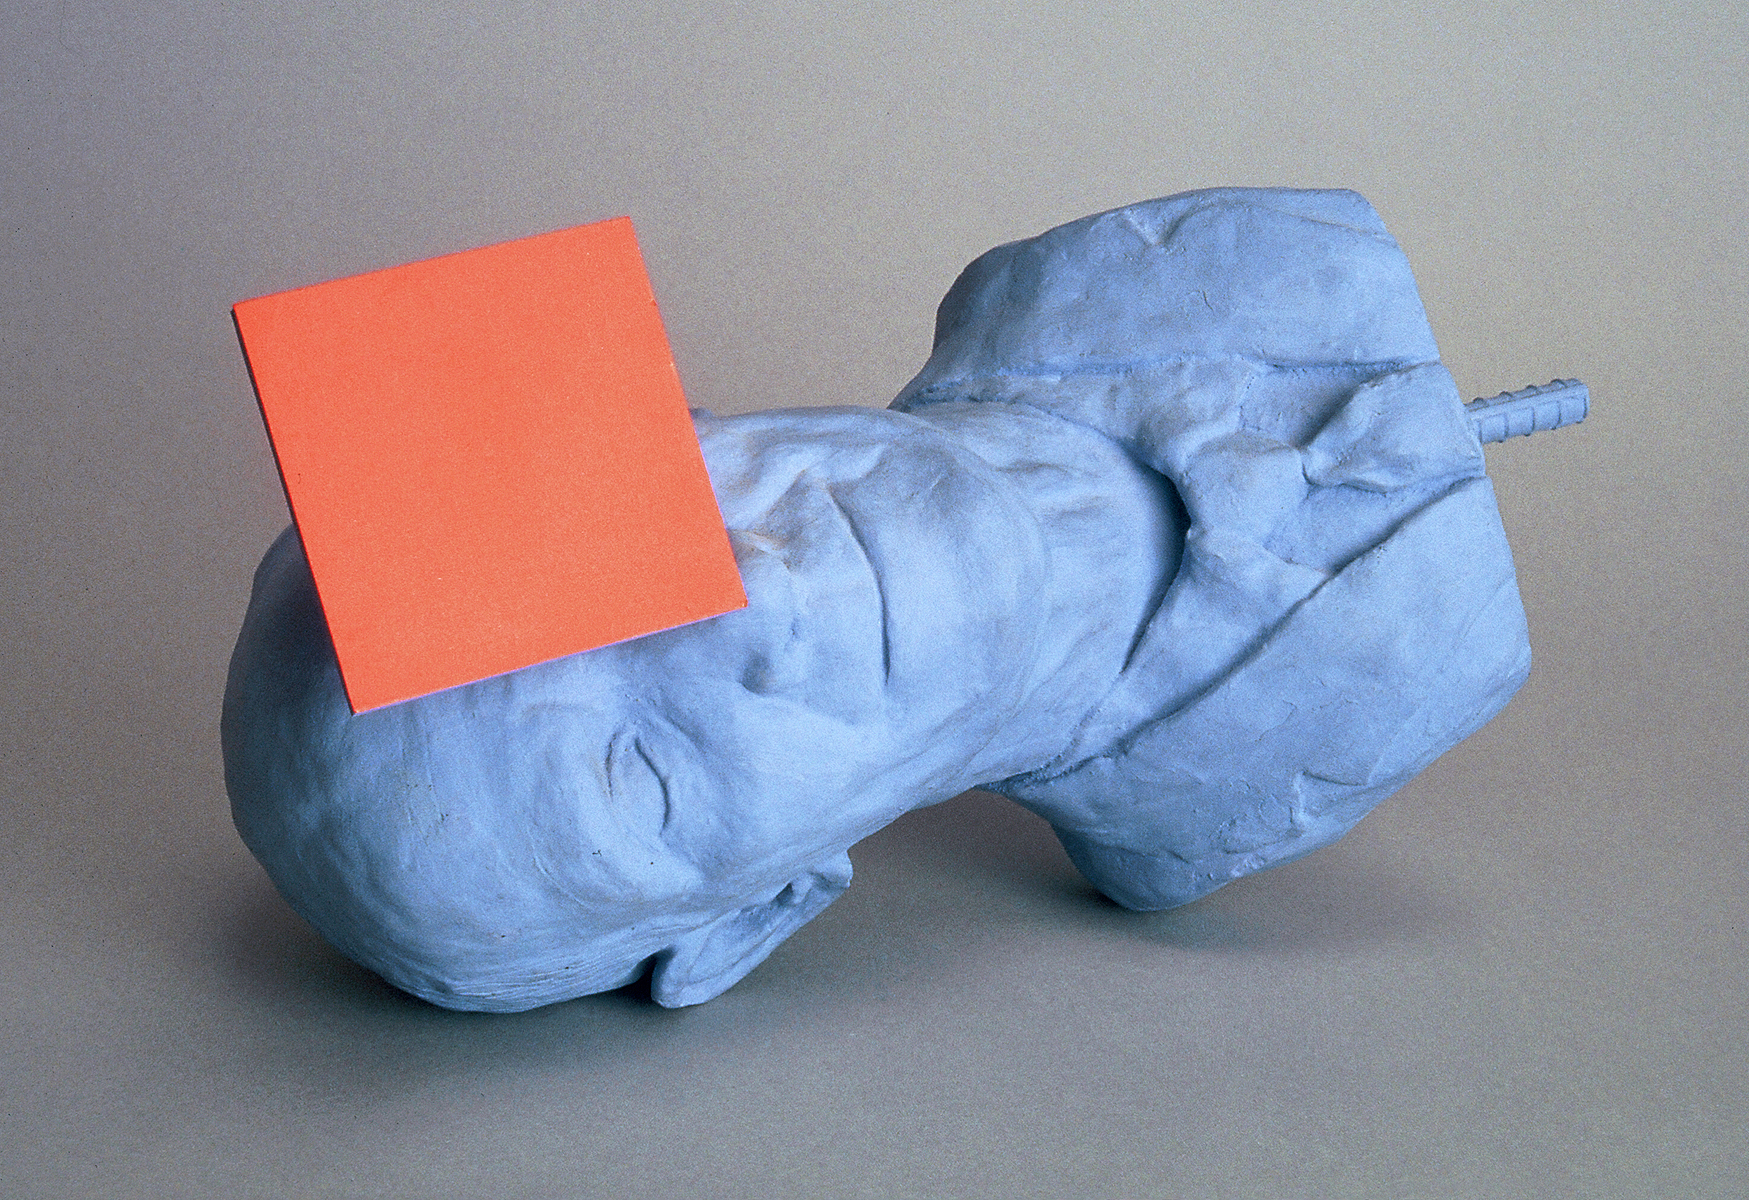 A blue painted statue head of a man in a jacket and tie, plus an orange square.